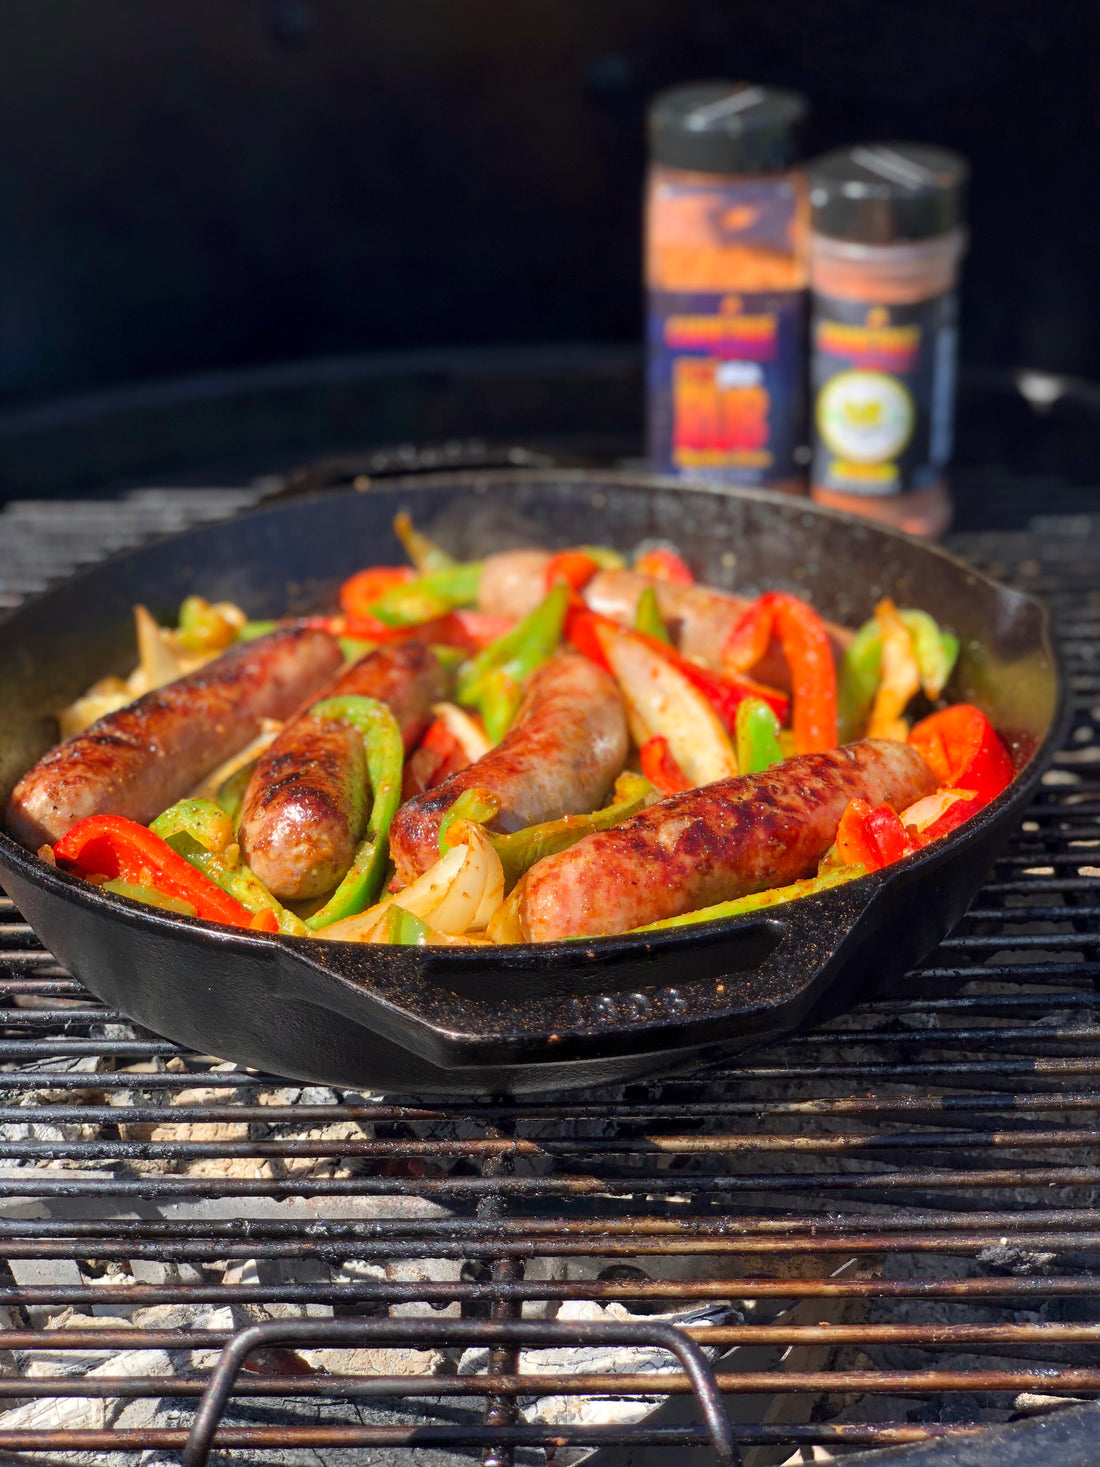 Grilled Beer Brats with peppers and onions